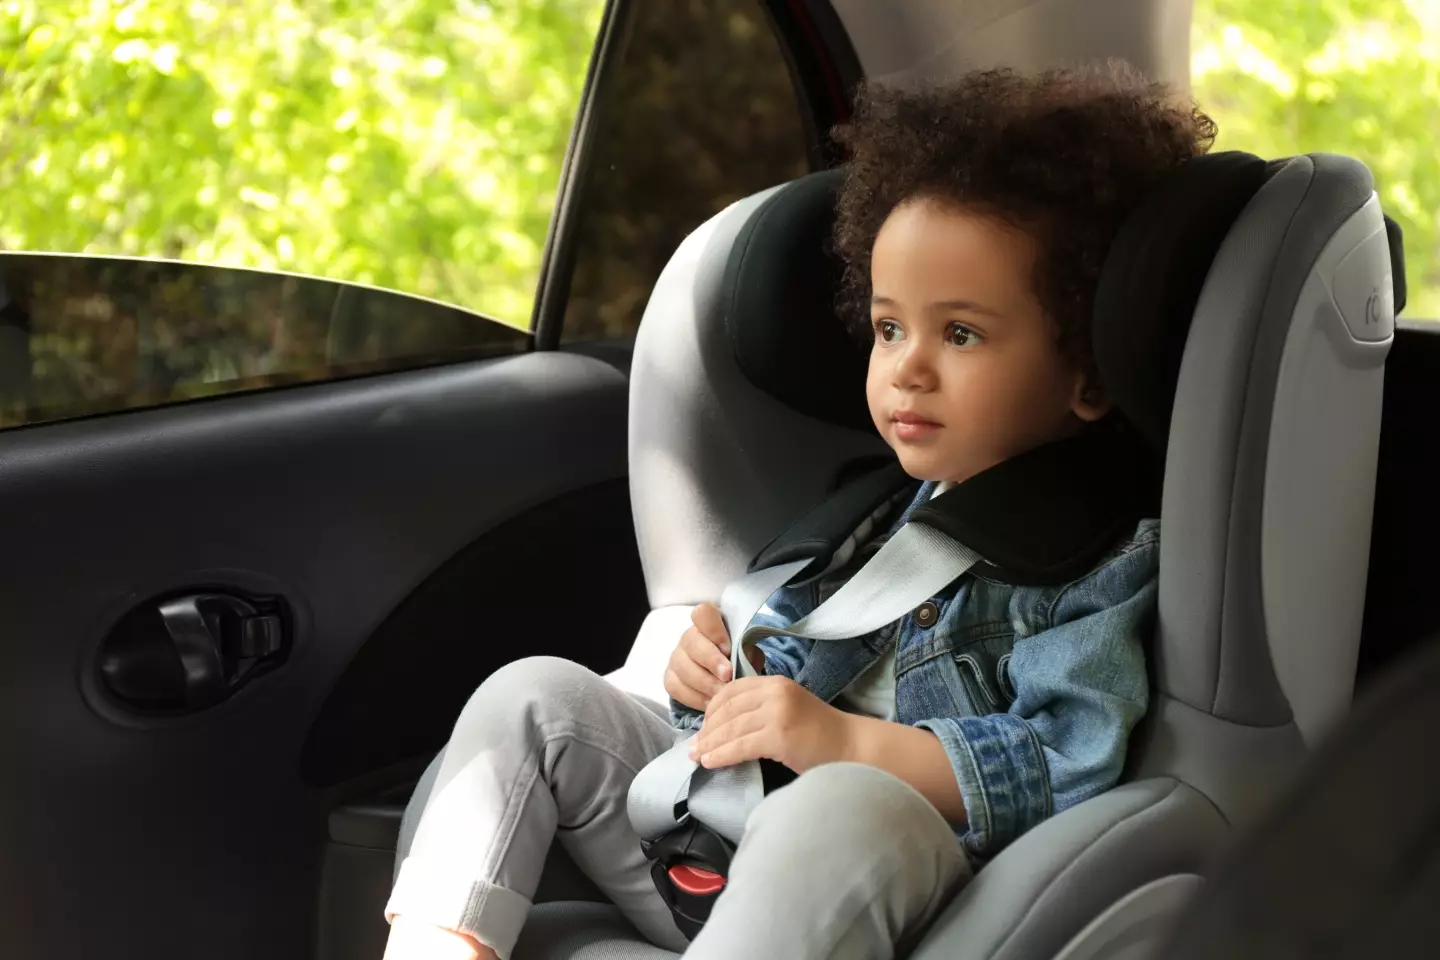 Parents will have to measure their child to find the correct car seat. (